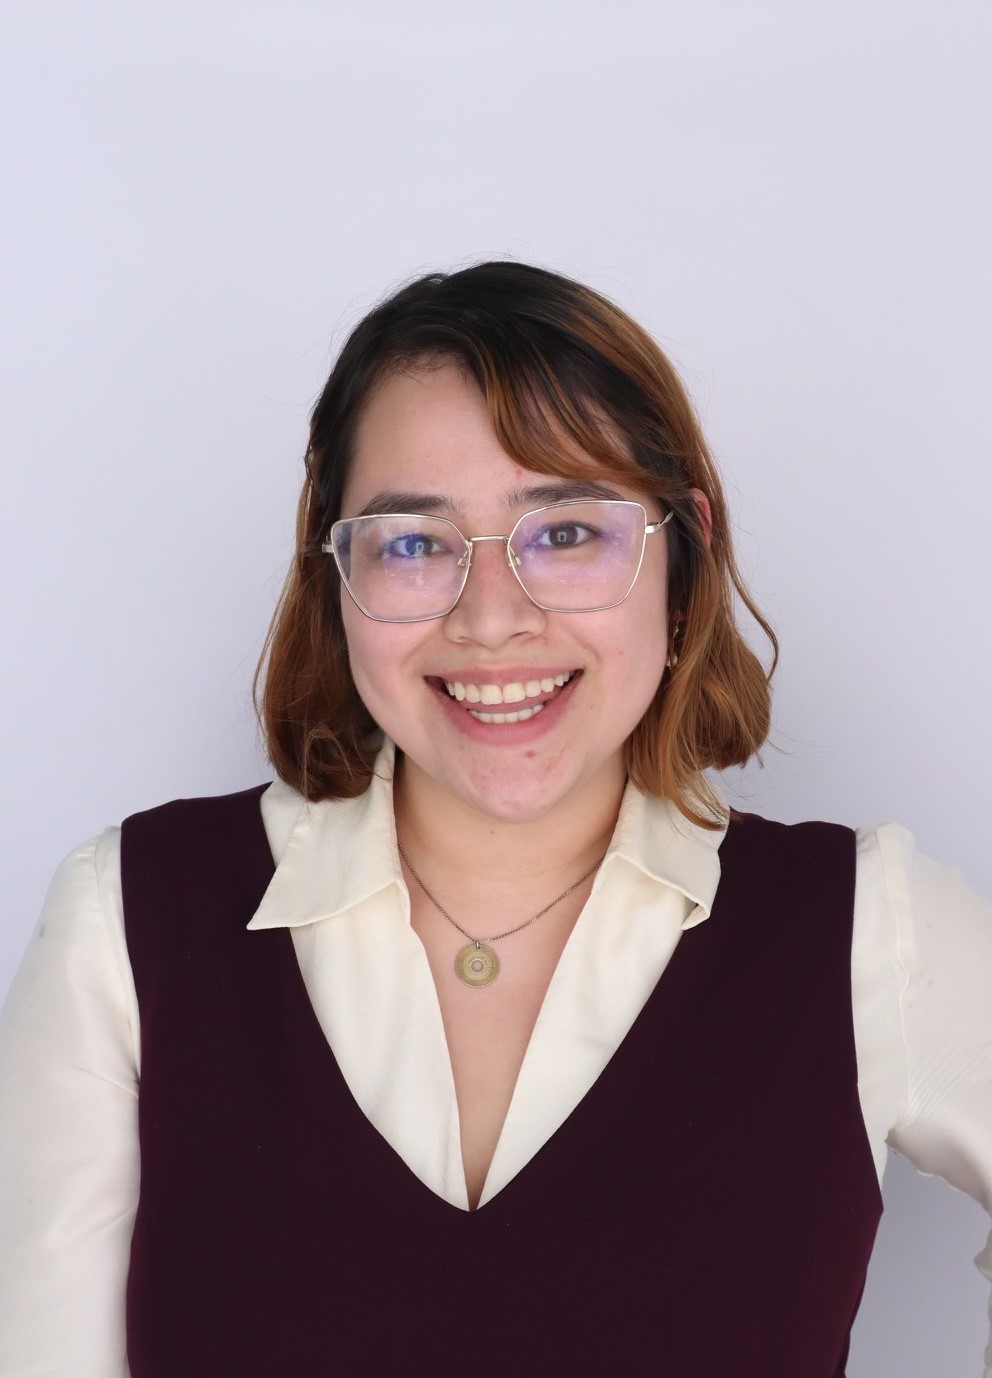 Professional portrait of a young woman wearing silver-rimmed glasses, a cream collared blouse, and an eggplant-colored vest.